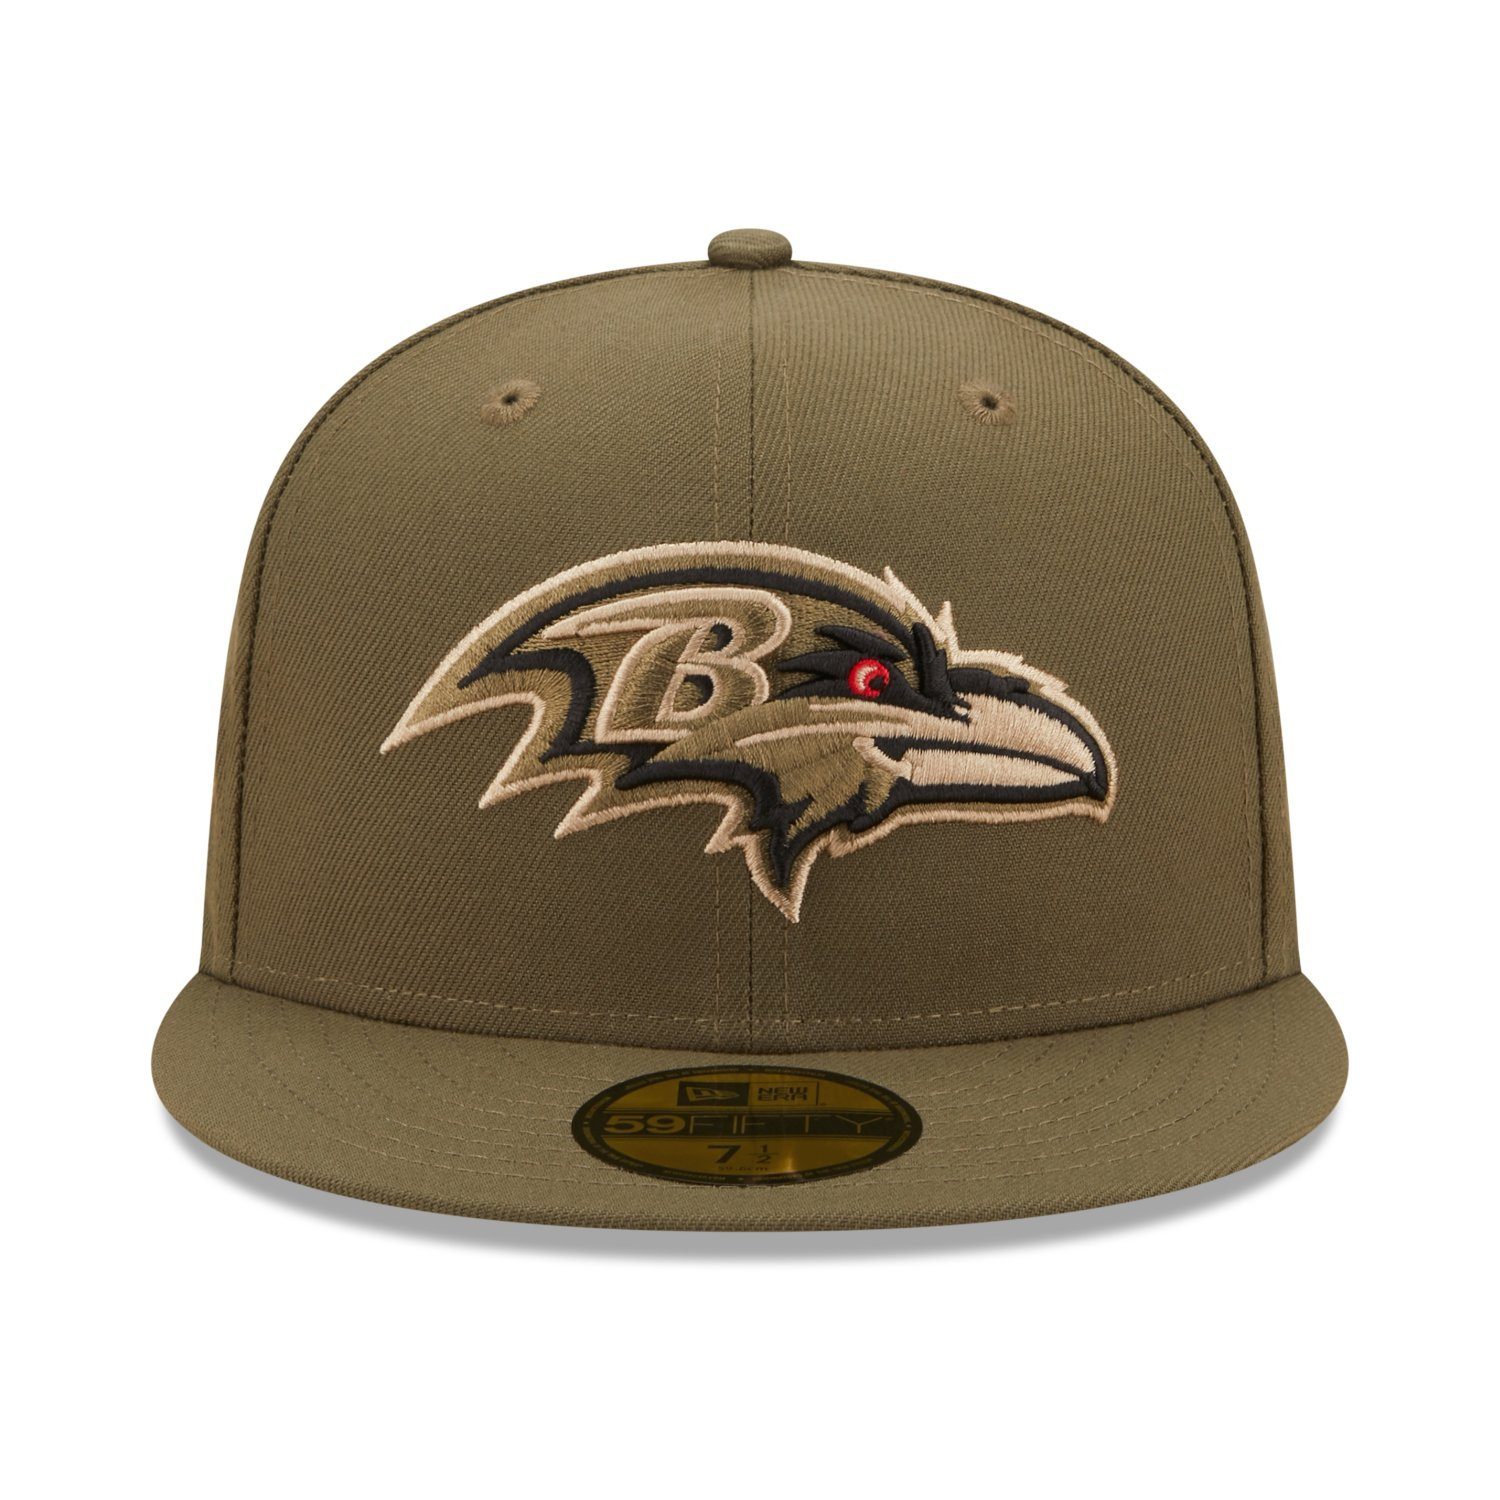 Throwback ProBowl New Era Superbowl Baltimore Fitted NFL Cap 59Fifty Ravens